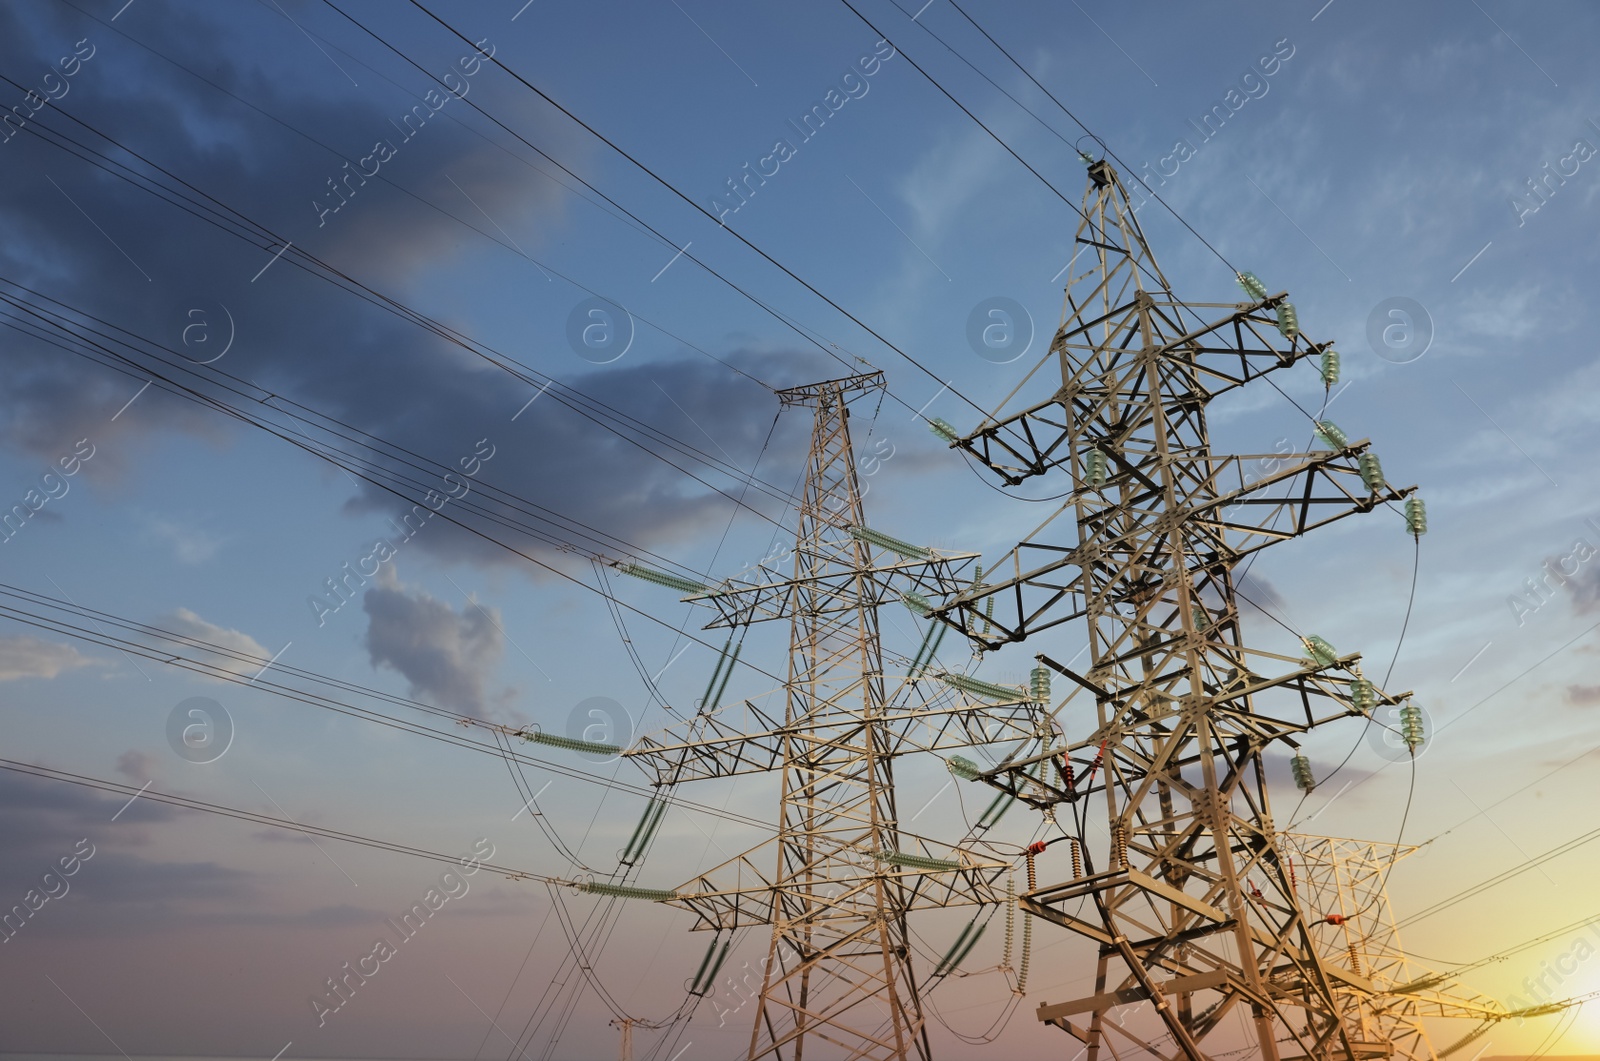 Photo of High voltage towers against cloudy sky at sunset, low angle view